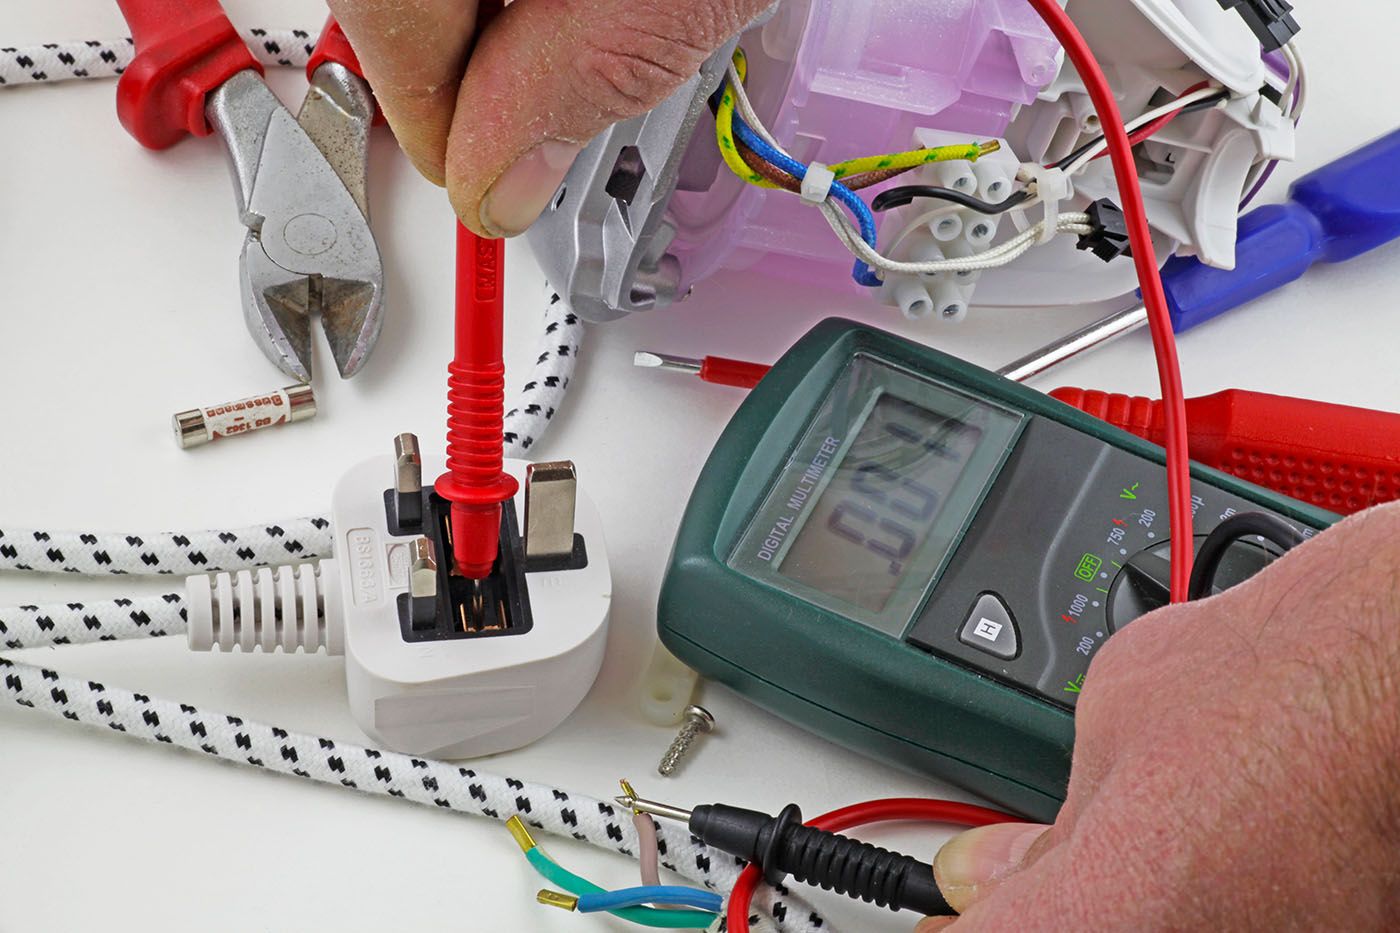 PAT Testing services